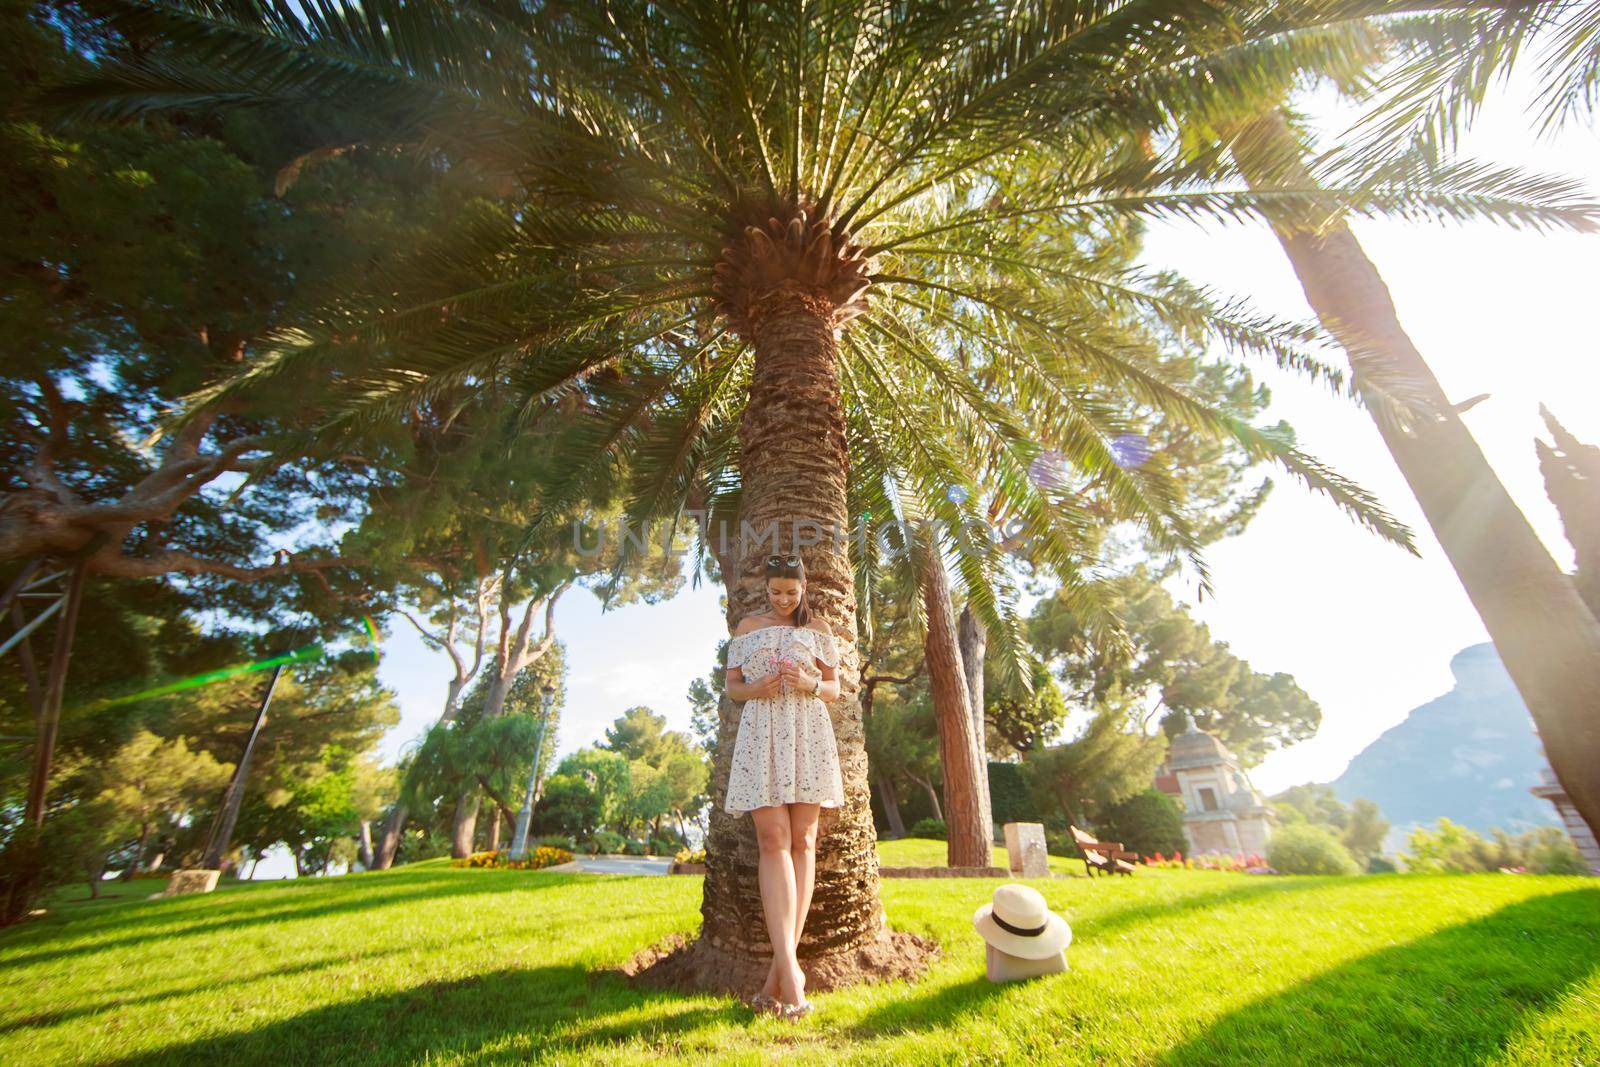 The bright beautiful girl in a light dress and hat standing under a palm tree of Monaco in sunny weather in summer. High quality photo